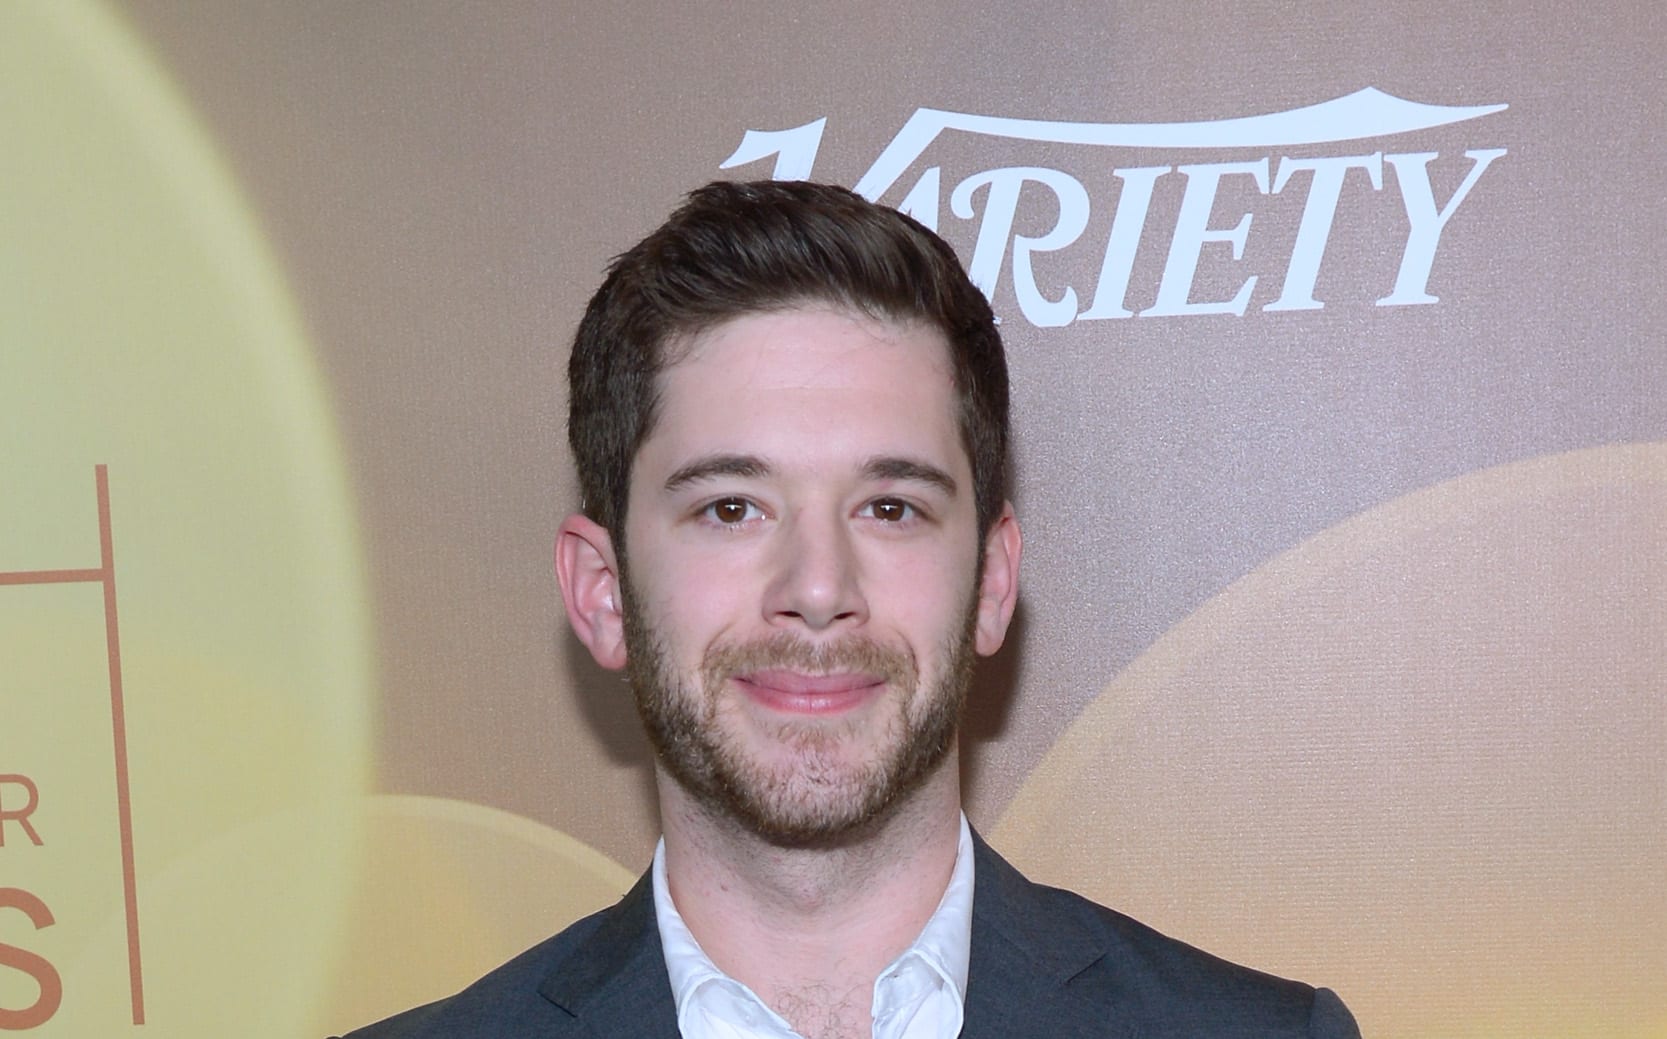 HQ Trivia and Vine co-founder Colin Kroll has died at the age of 35 of a suspected drug overdose.